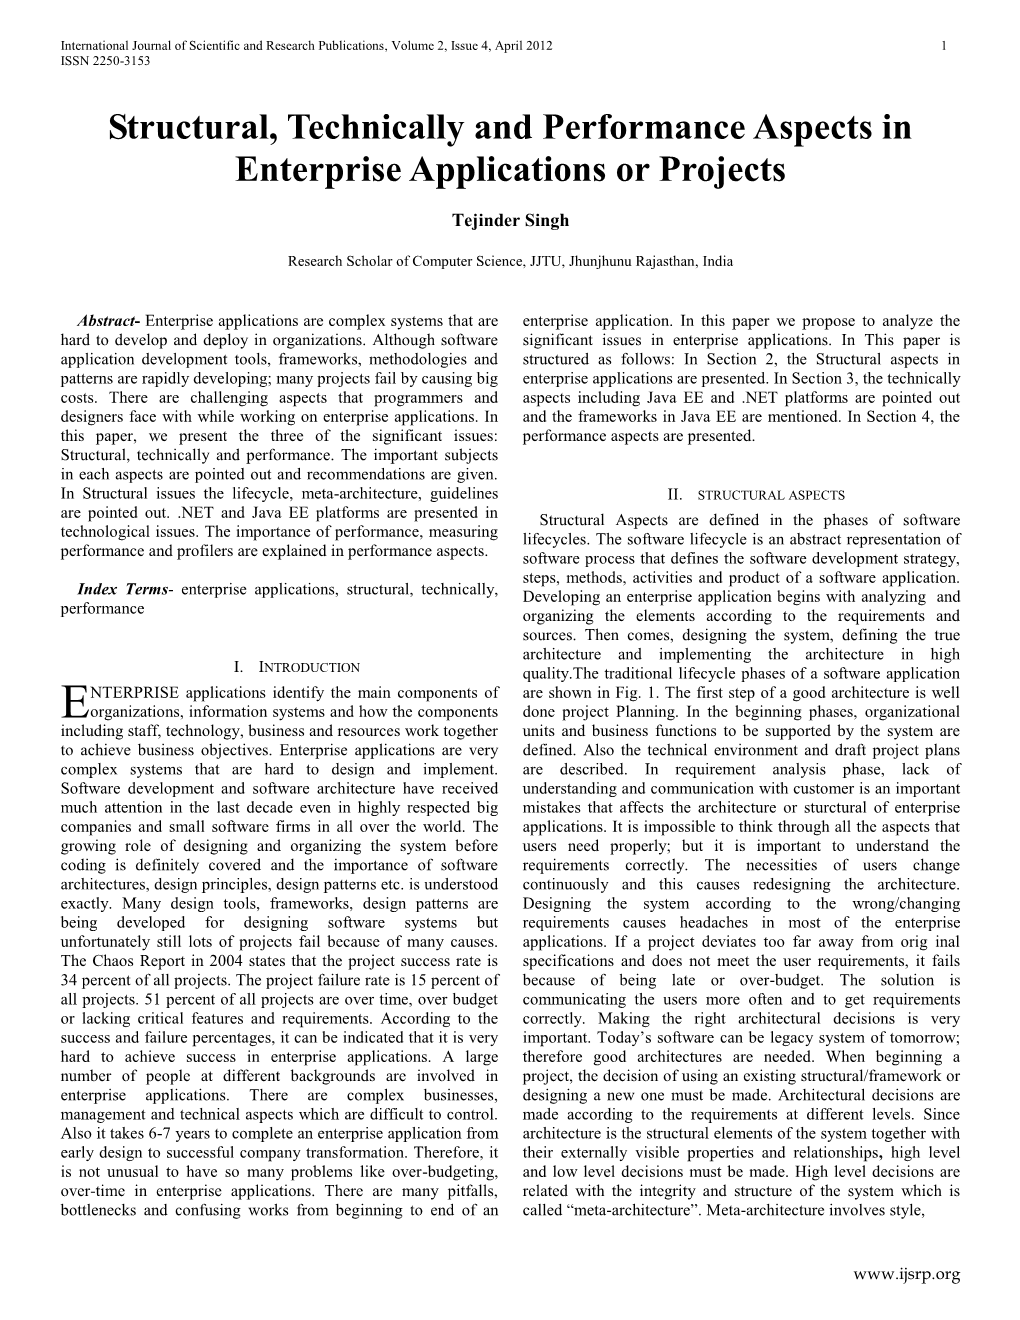 Structural, Technically and Performance Aspects in Enterprise Applications Or Projects